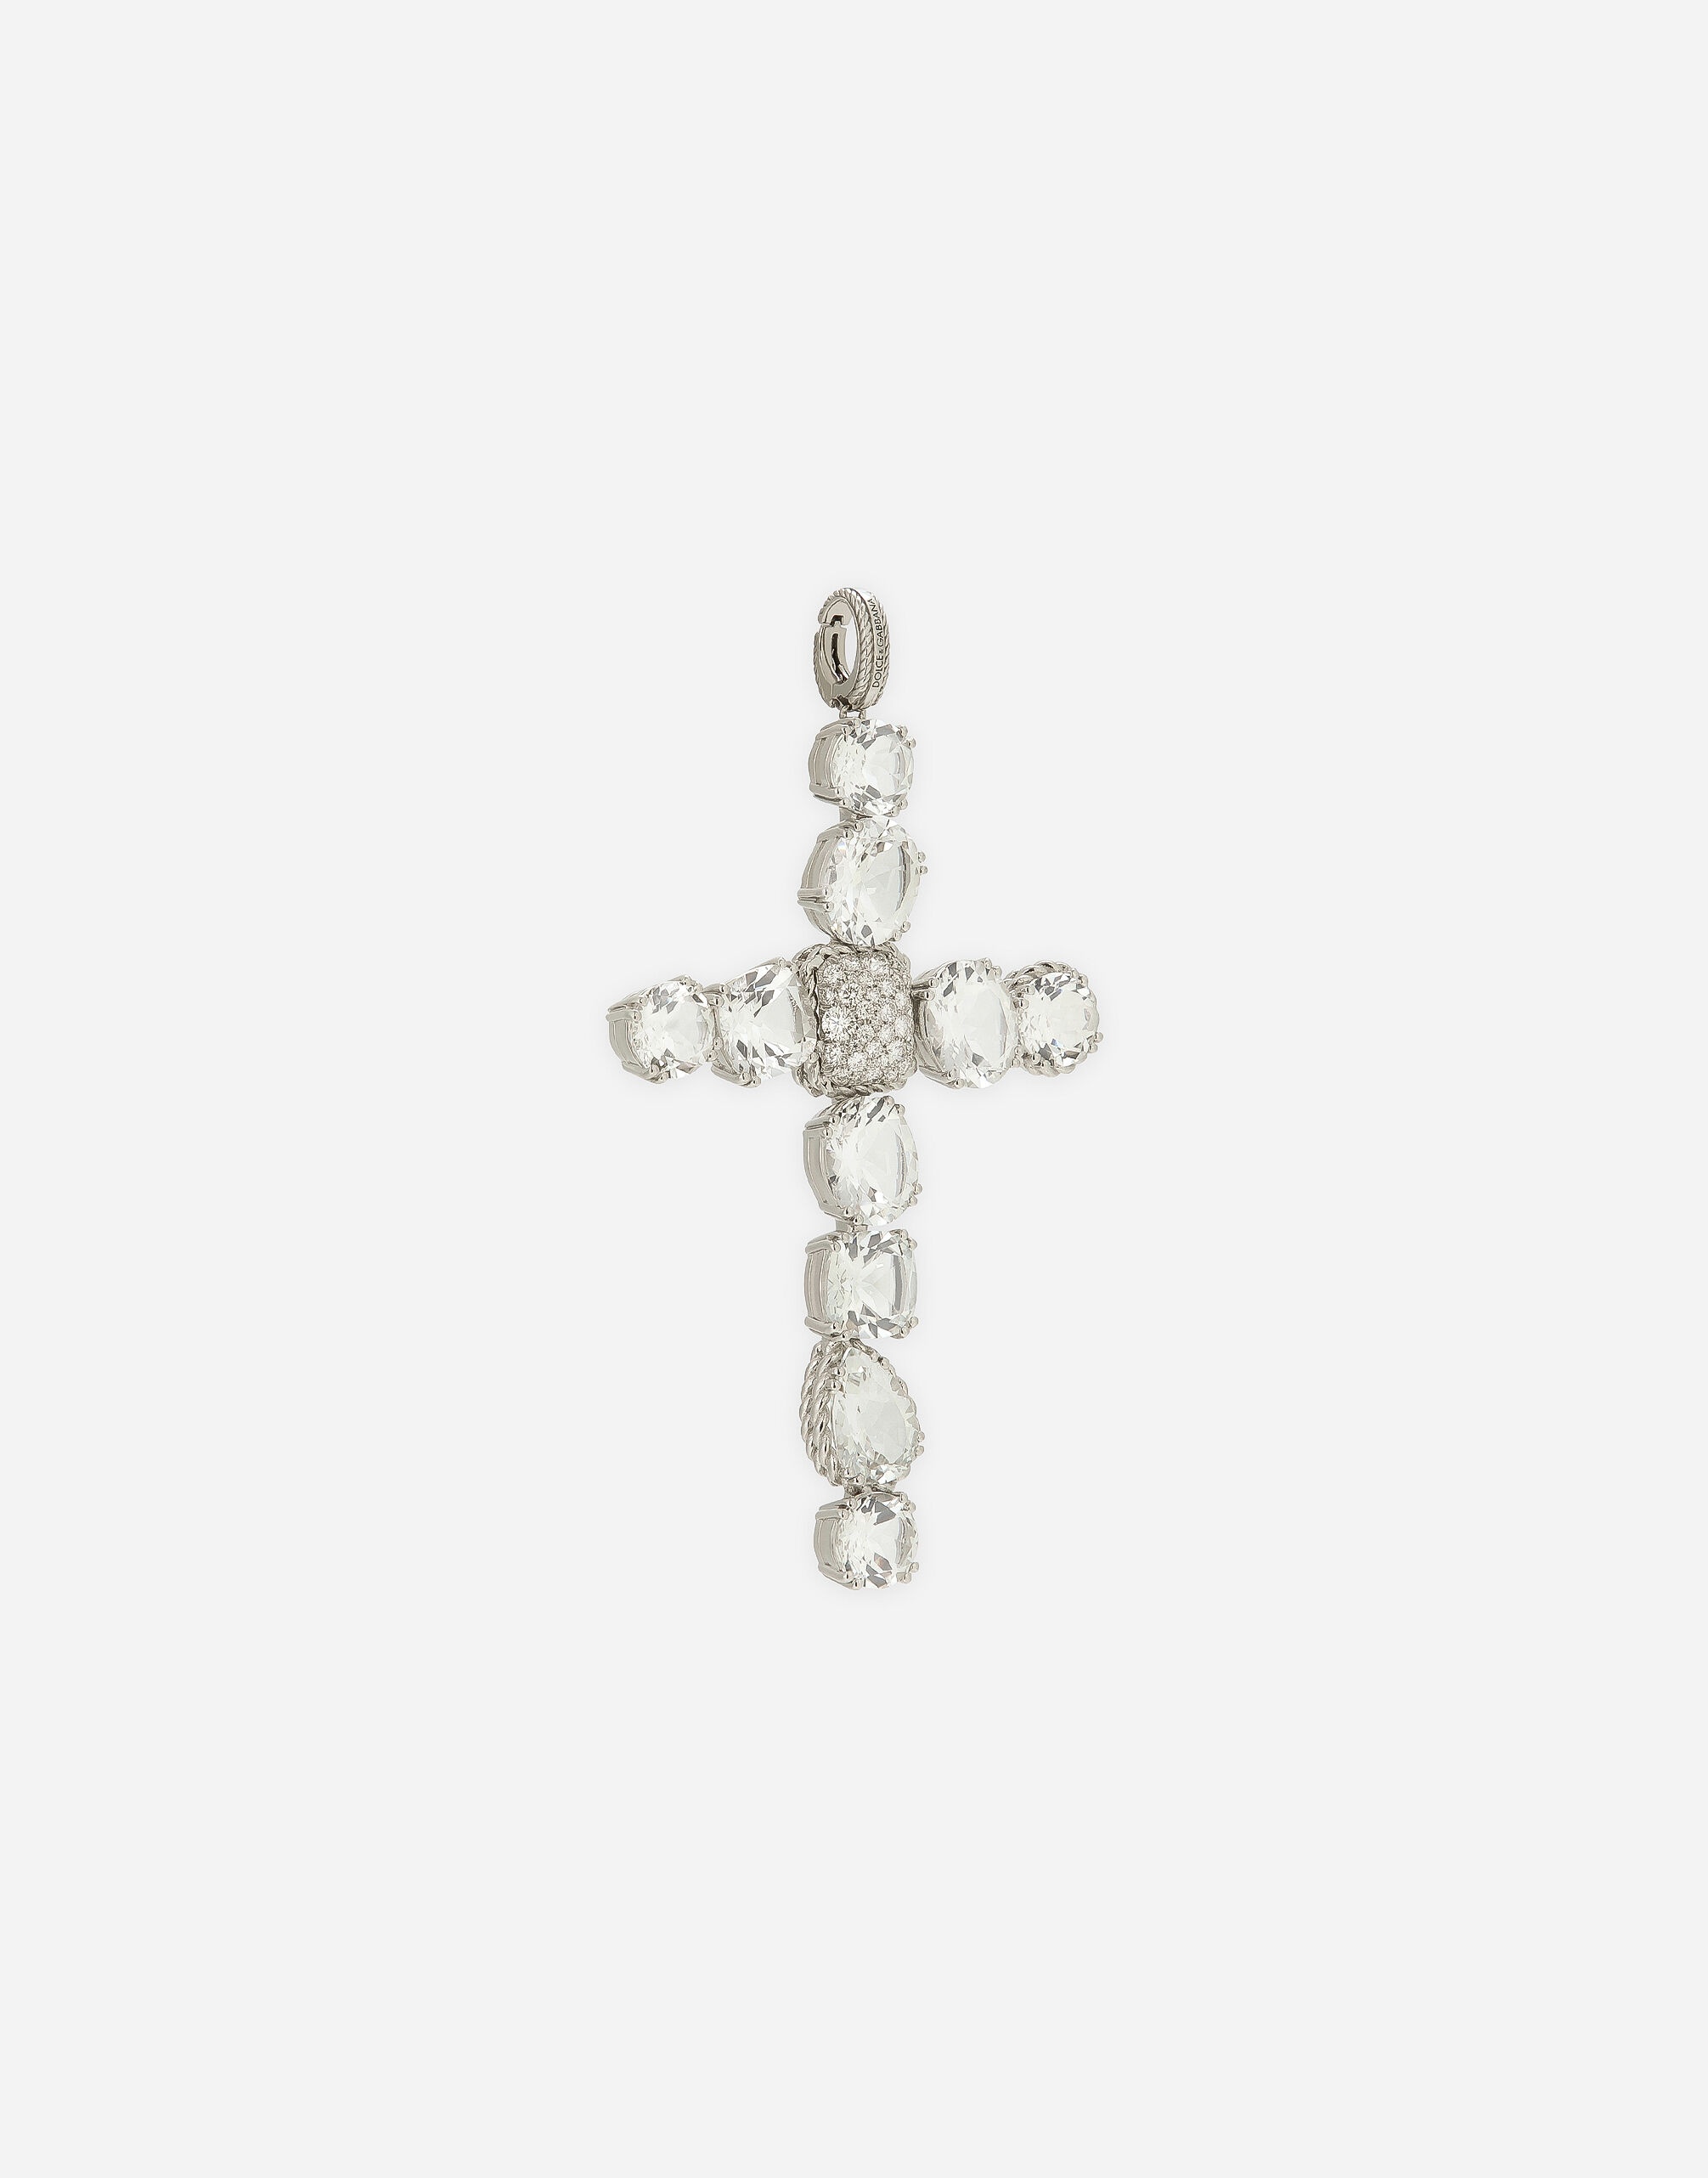 Anna charm in white gold 18Kt and colorless topazes - 2